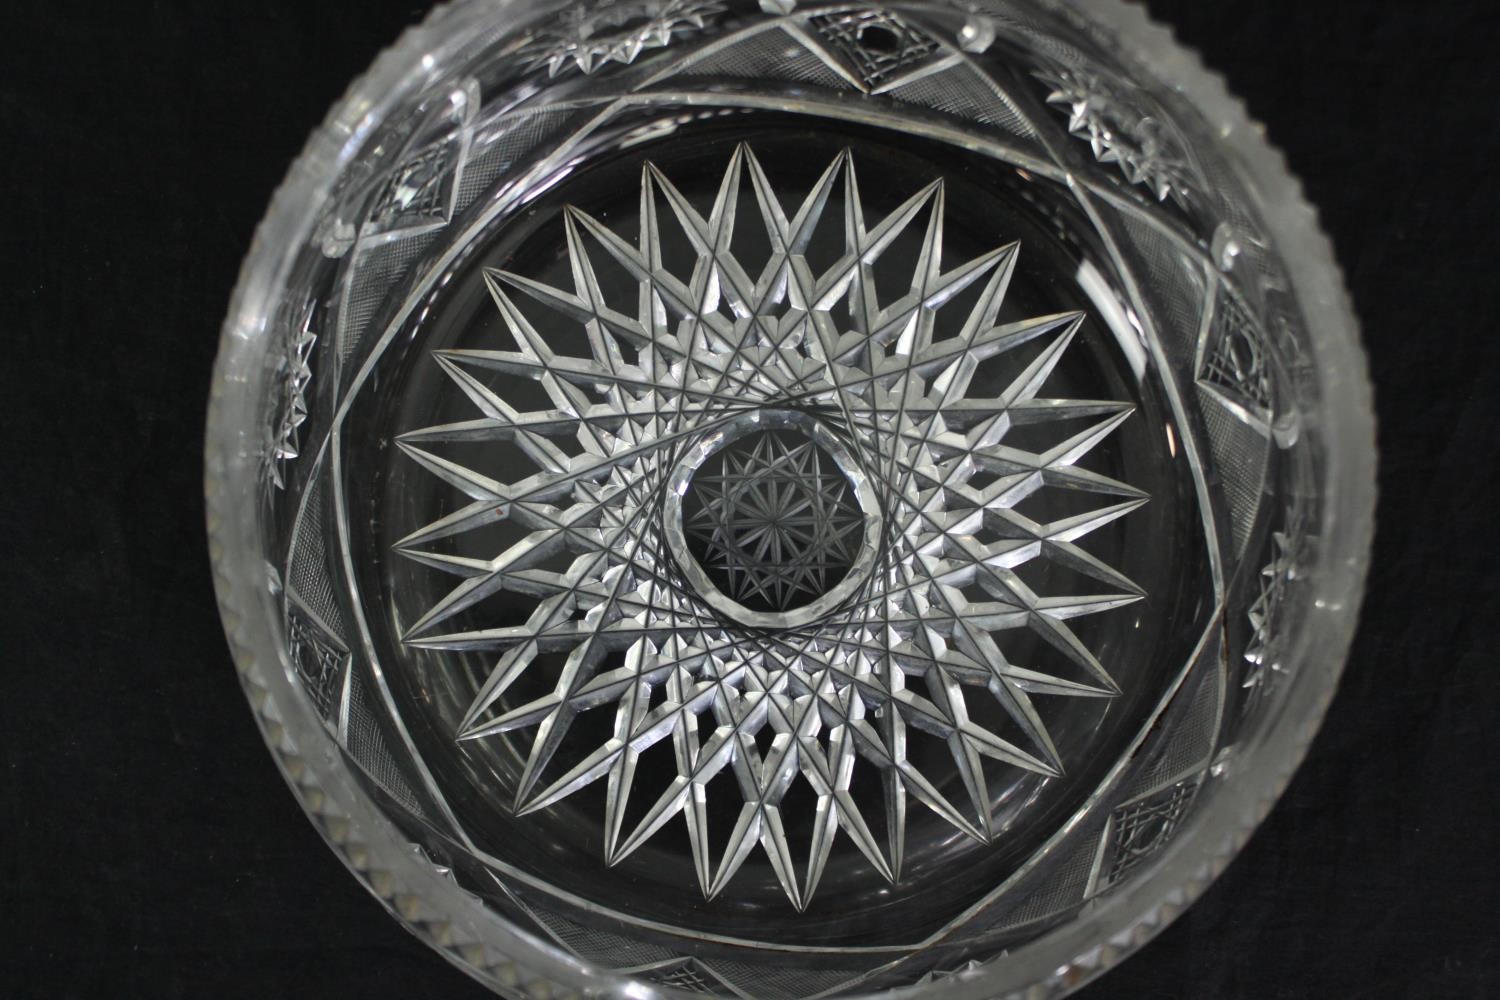 A vintage cut glass fruit bowl along with other glass items. Dia.25cm. (largest). - Image 9 of 9